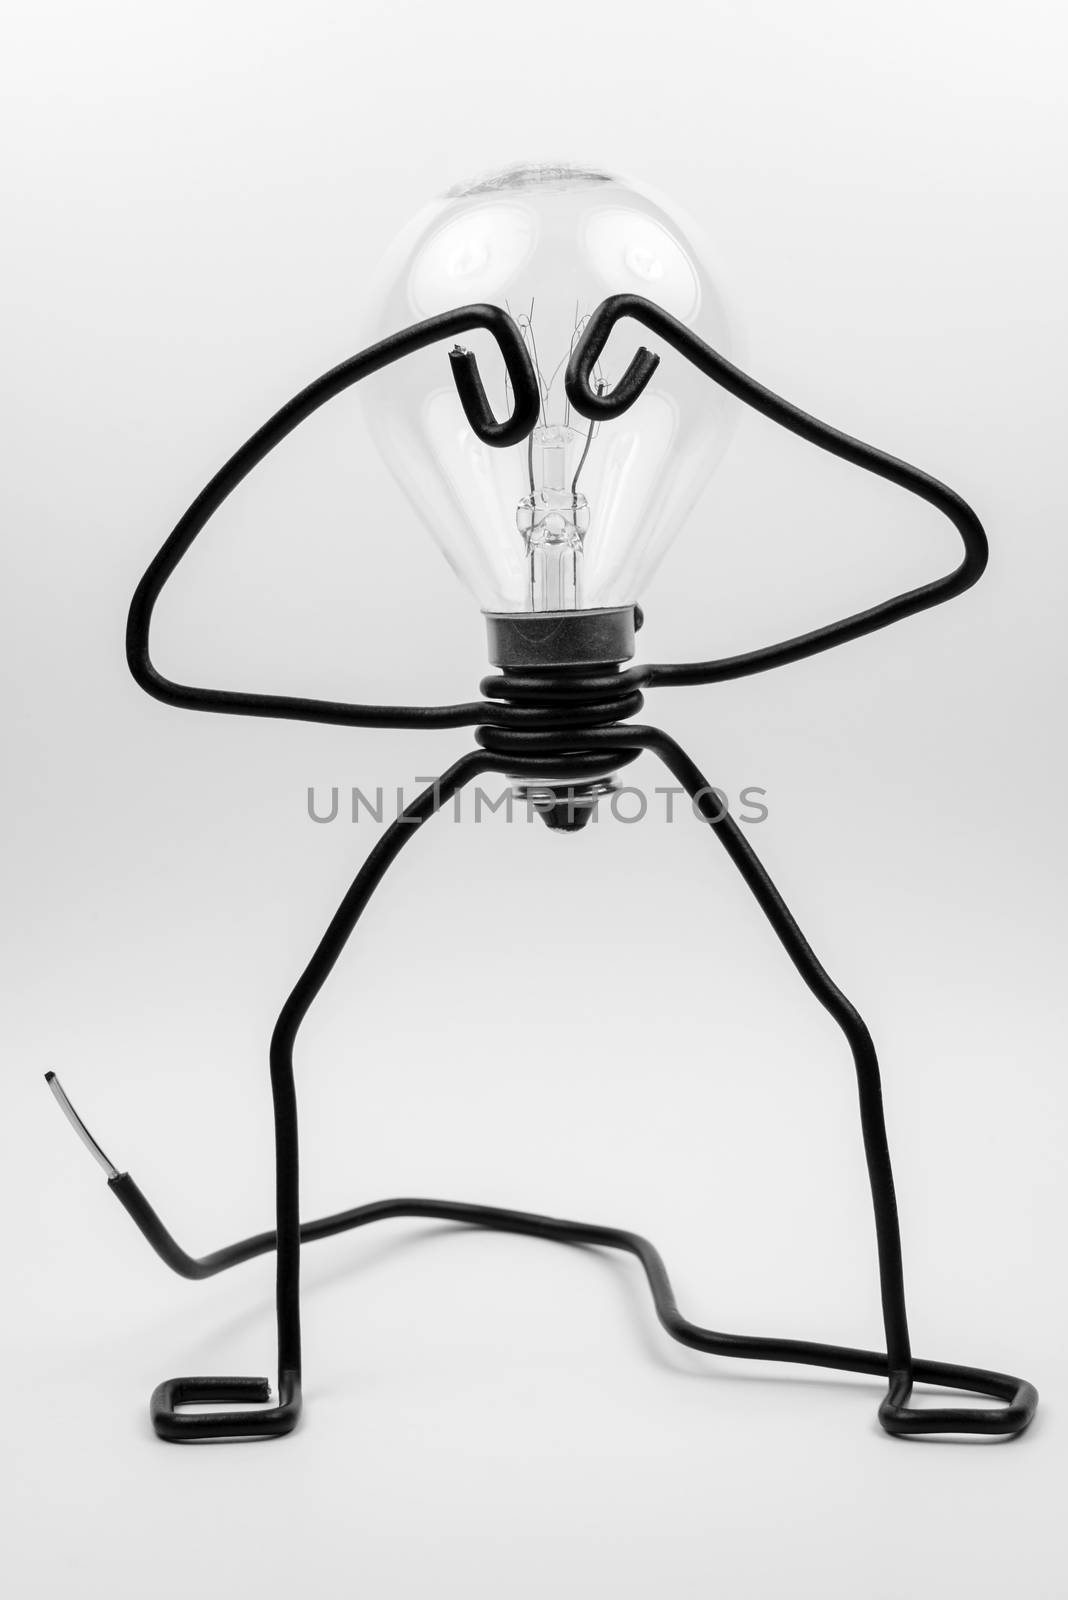 Fantasy figure of a light bulb and wire
 by Tofotografie